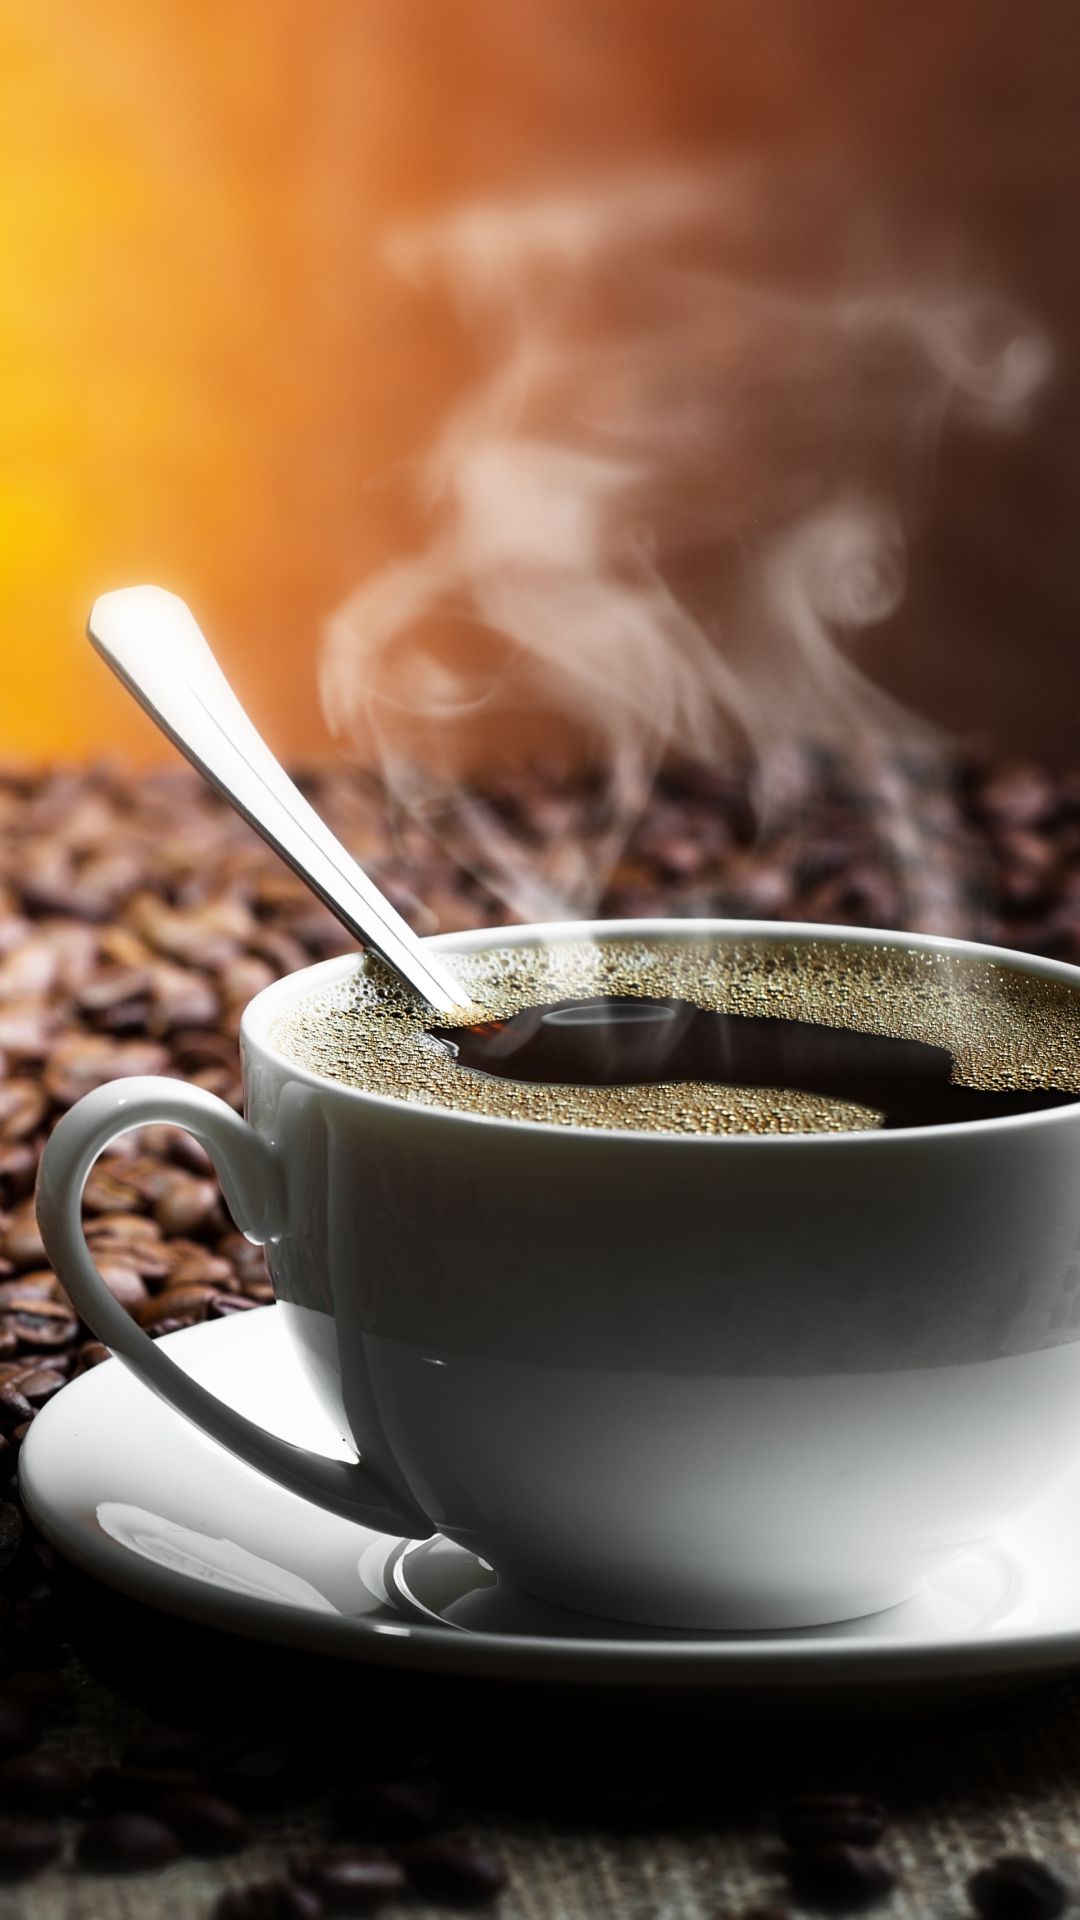 Hot Coffee Images Hd - HD Wallpaper 